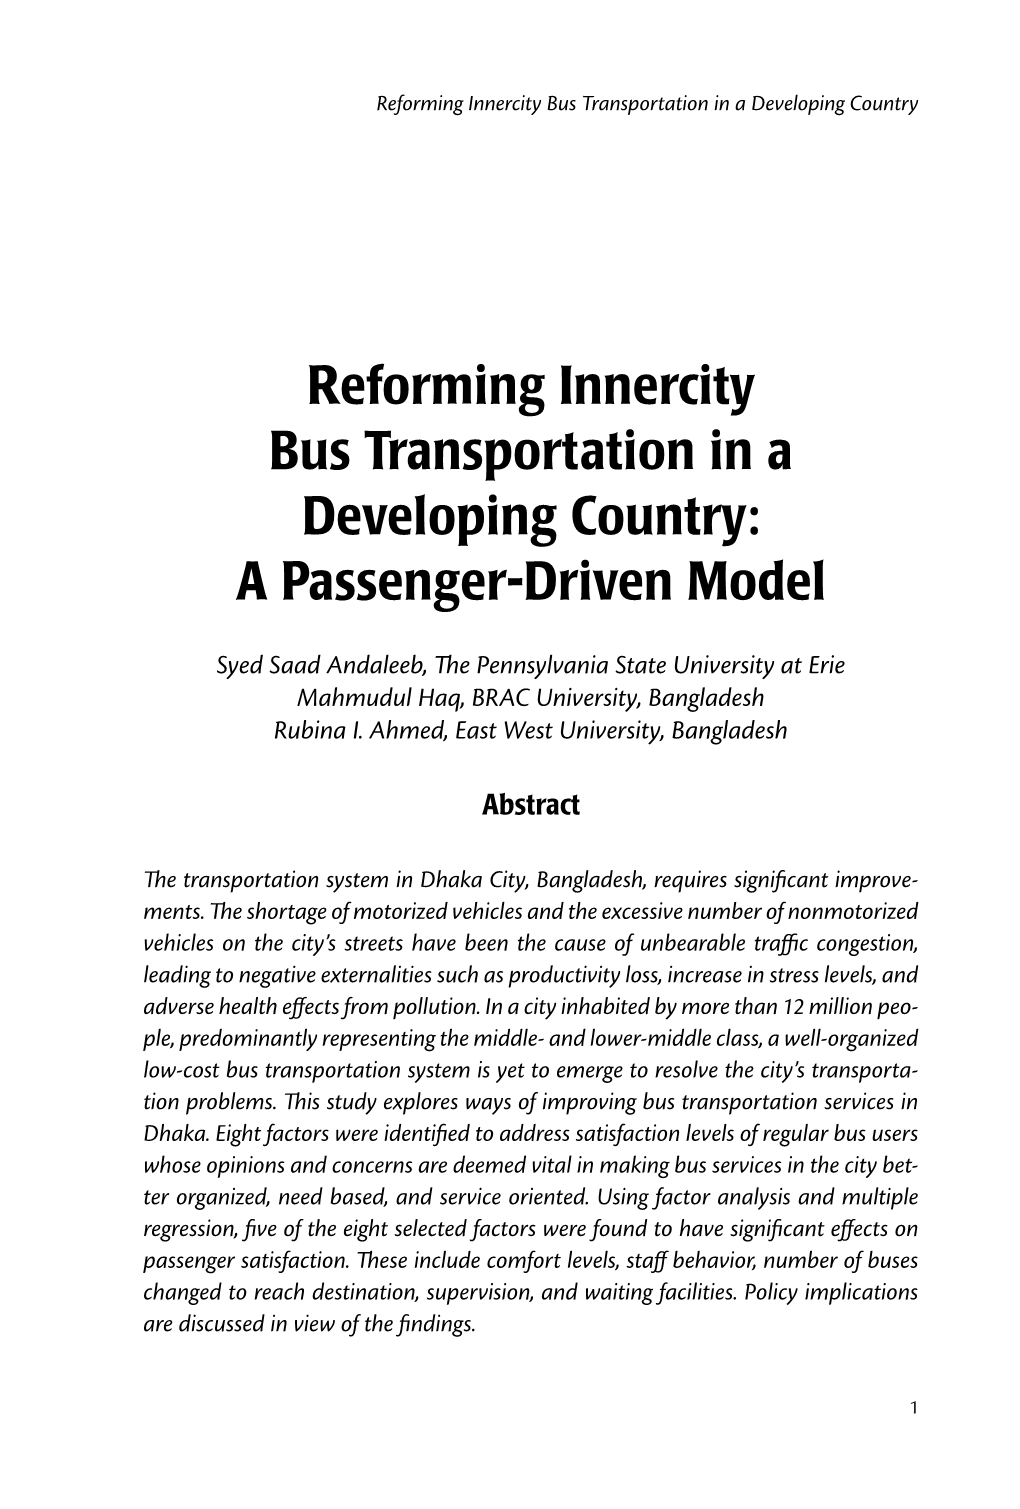 Reforming Innercity Bus Transportation in a Developing Country